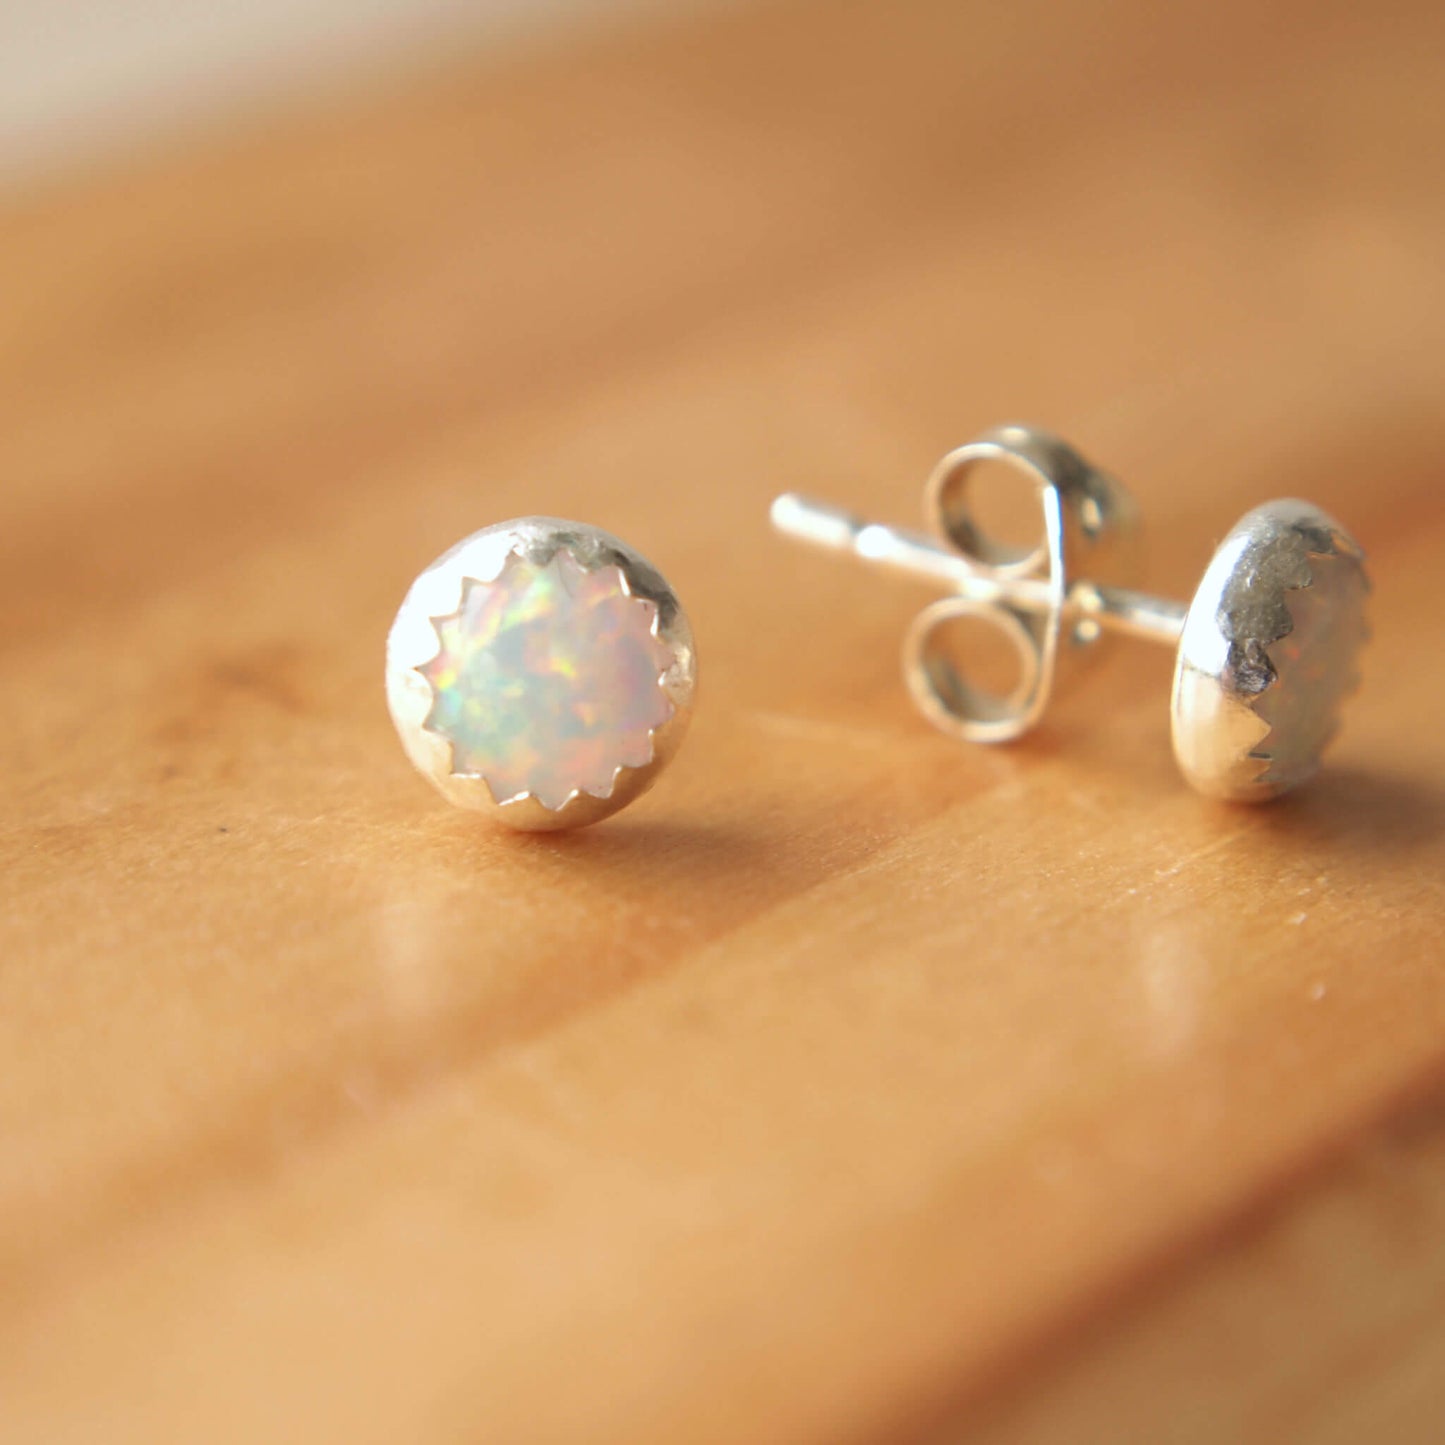 White Opal simple SIlver and gemstone earrings. October Birthstones with a white opal and a simple sterling silver setting, handmade by maram jewellery in edinburgh scotland UK